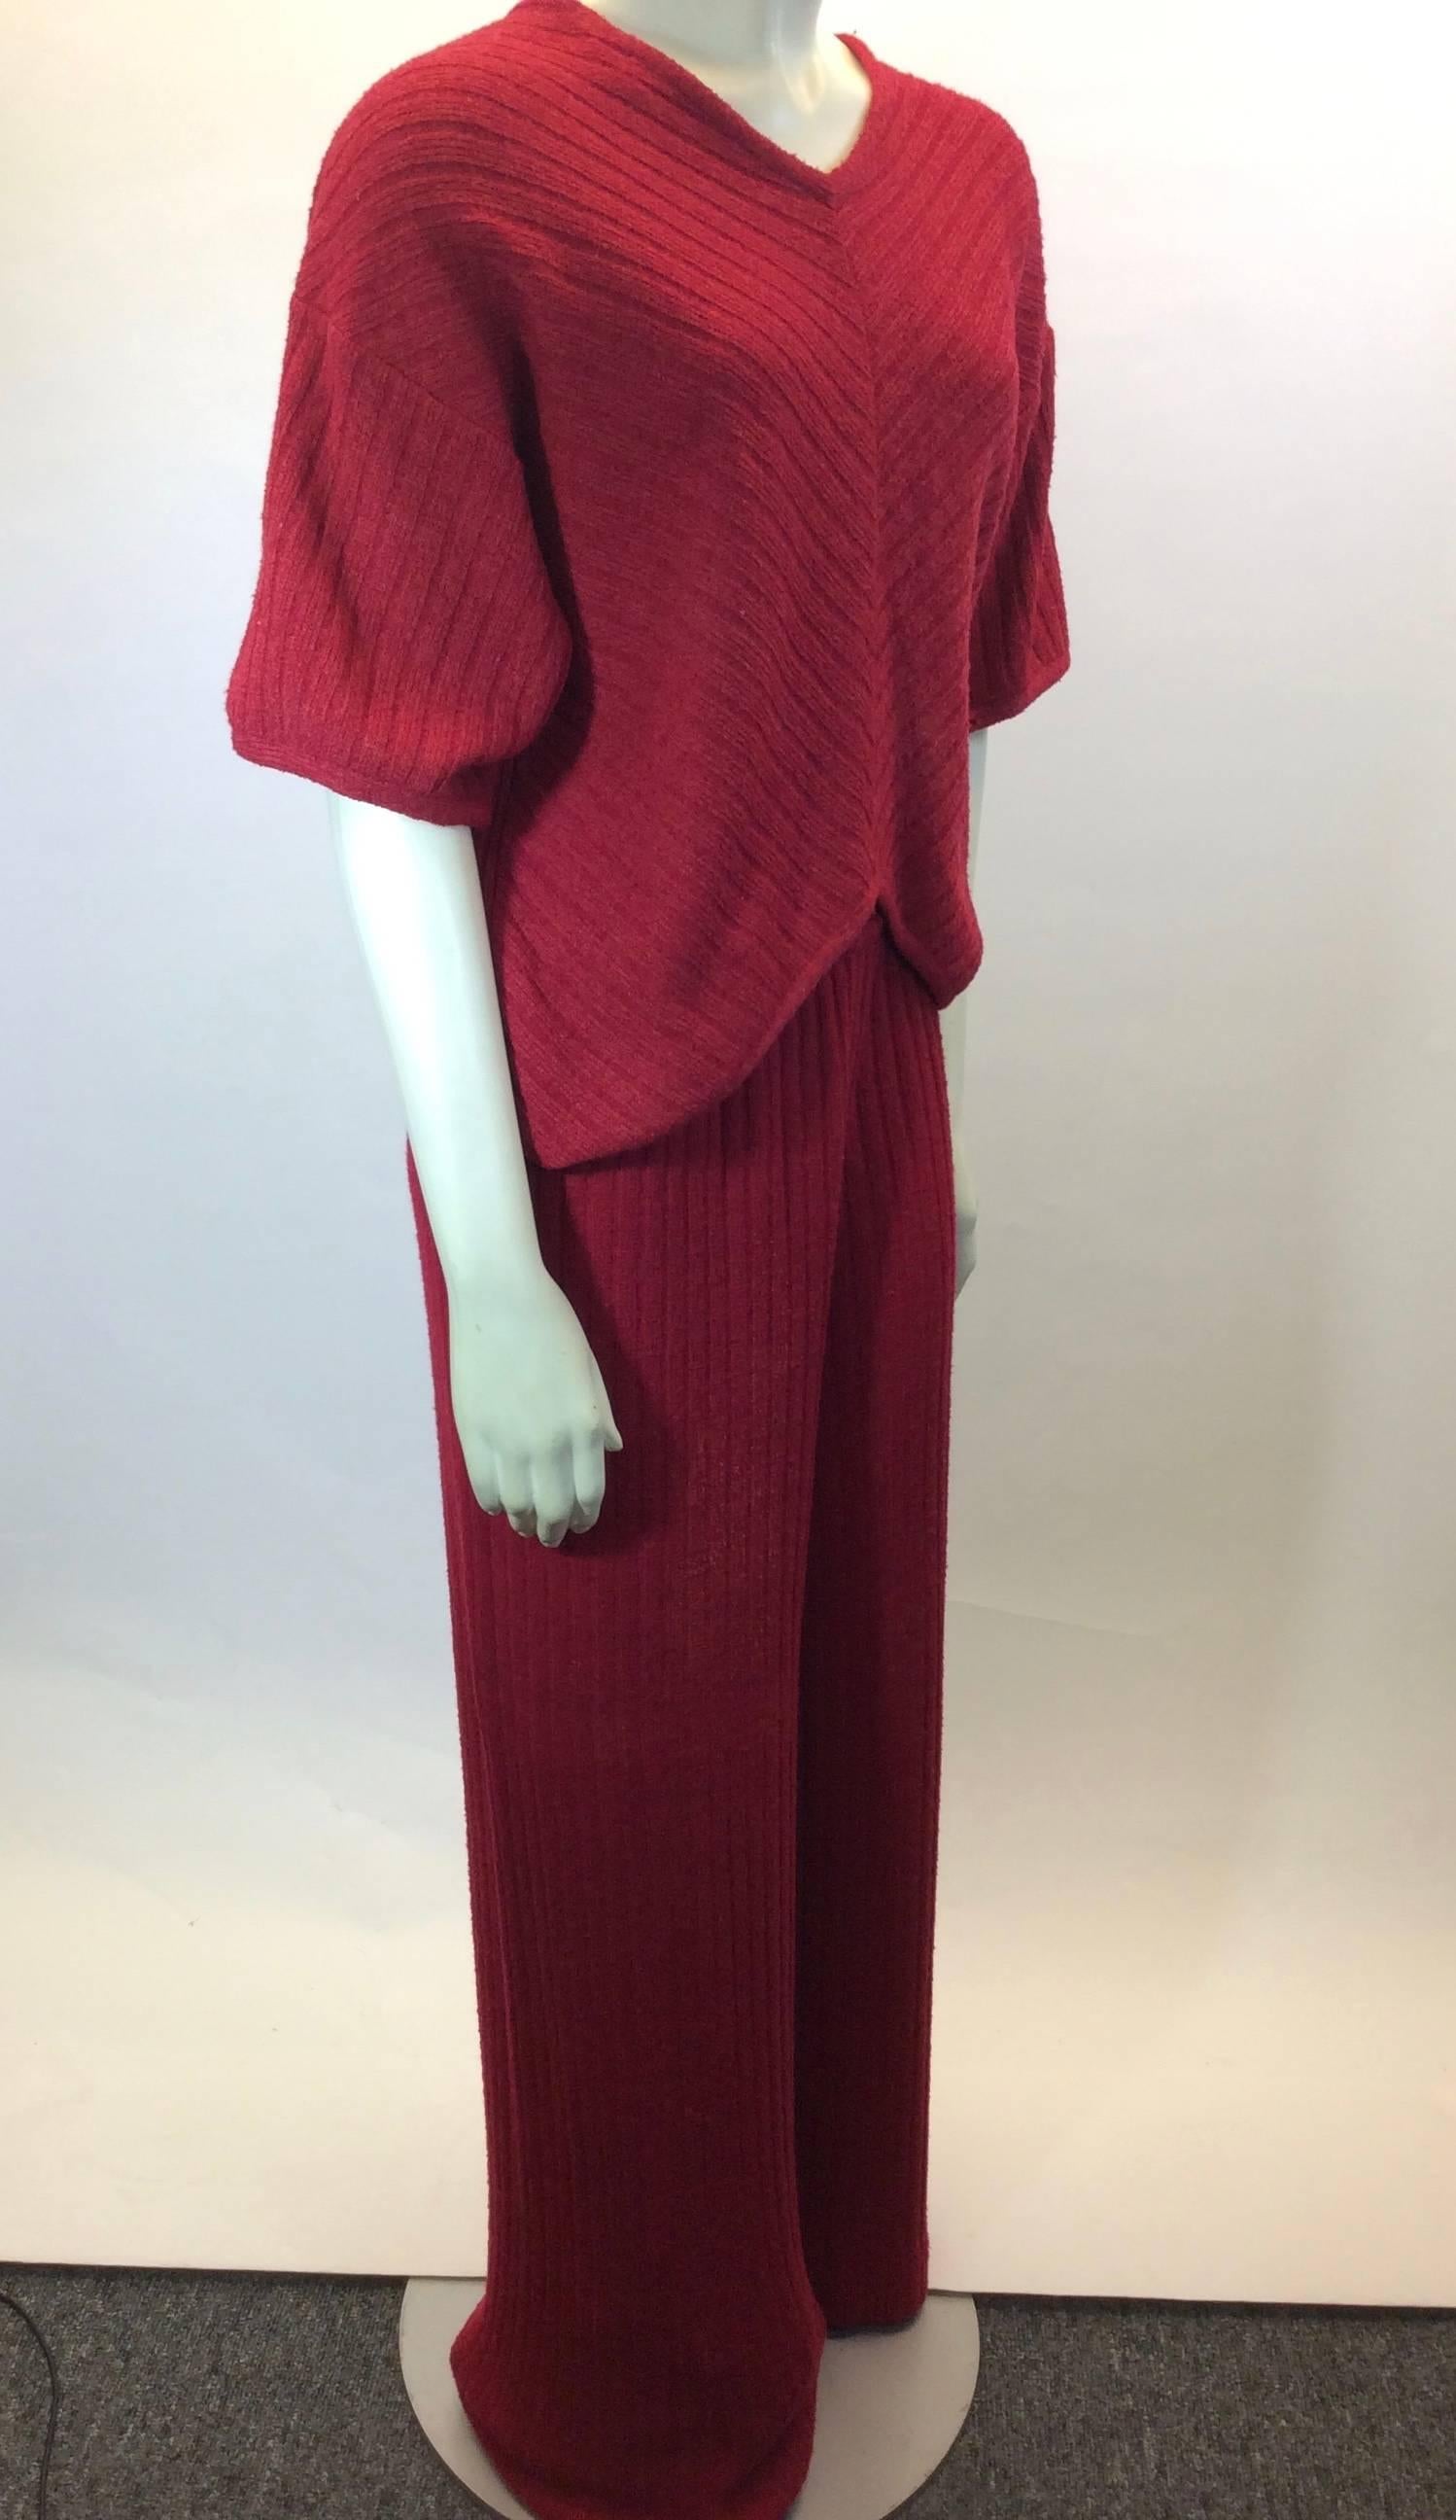 Red Knit Missoni Sweater and Pant set
Expendable Waist on Pants
Pant Length: 41" Inches
13" Inch Sleeve Length 
